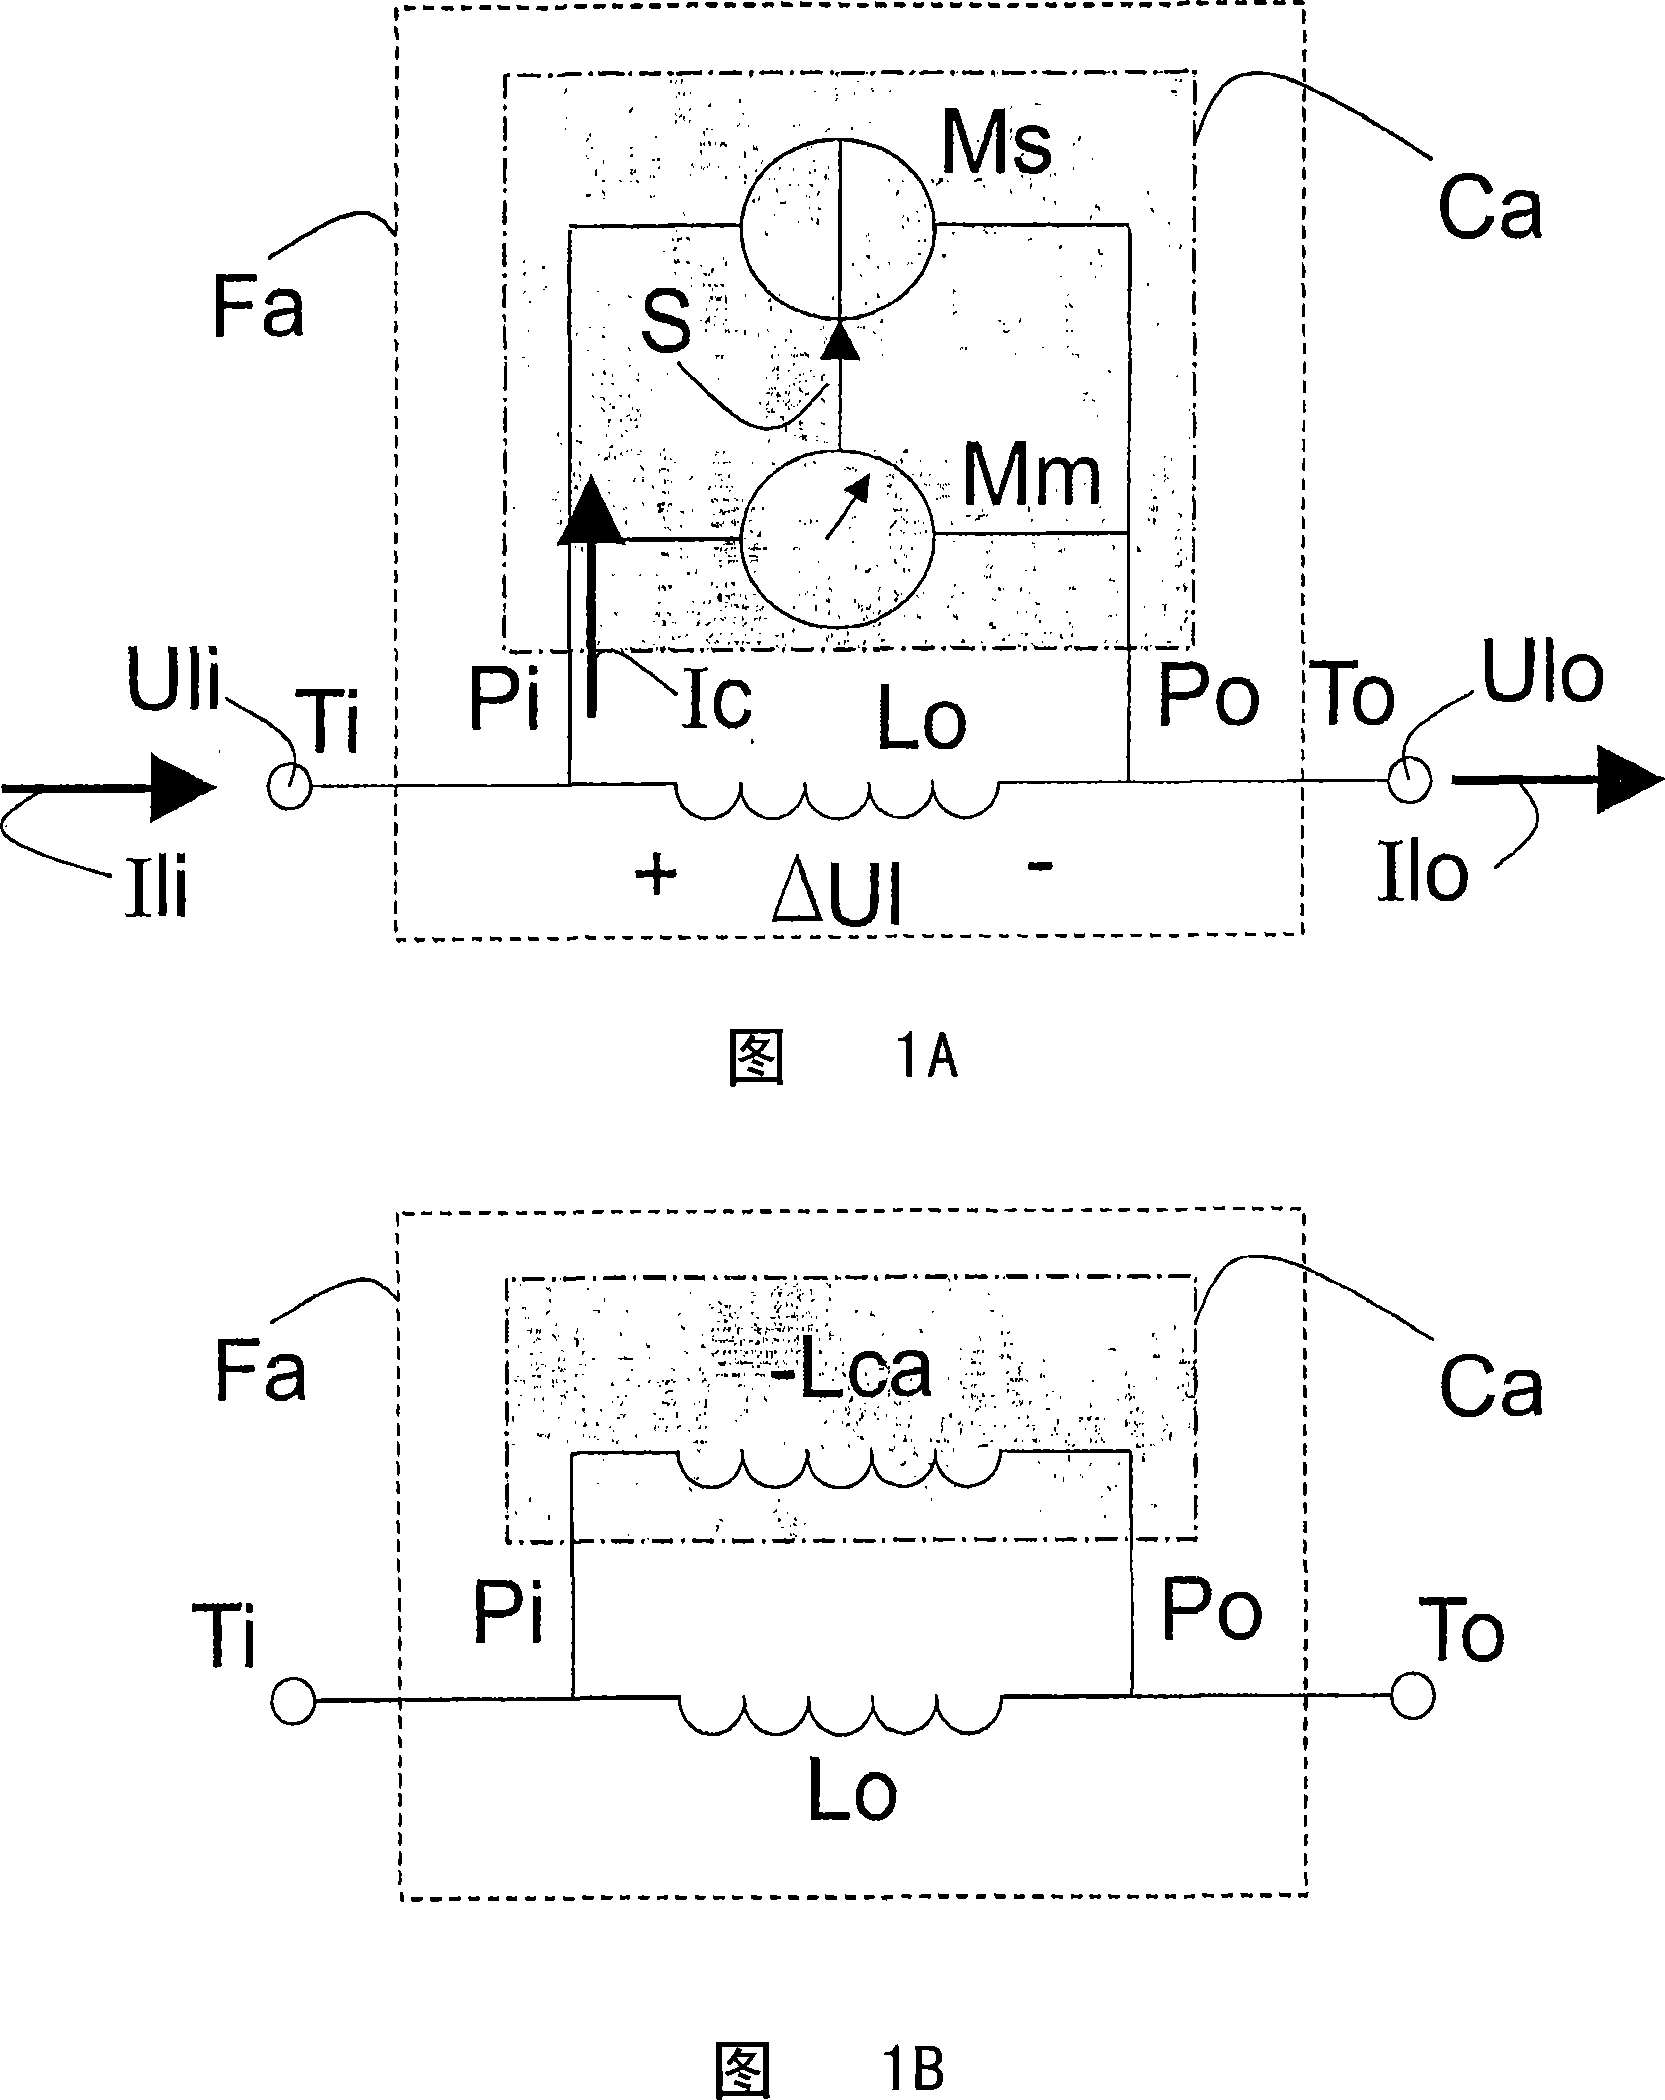 Active electromagnetic interference filter circuit for suppressing a line conducted interference signal